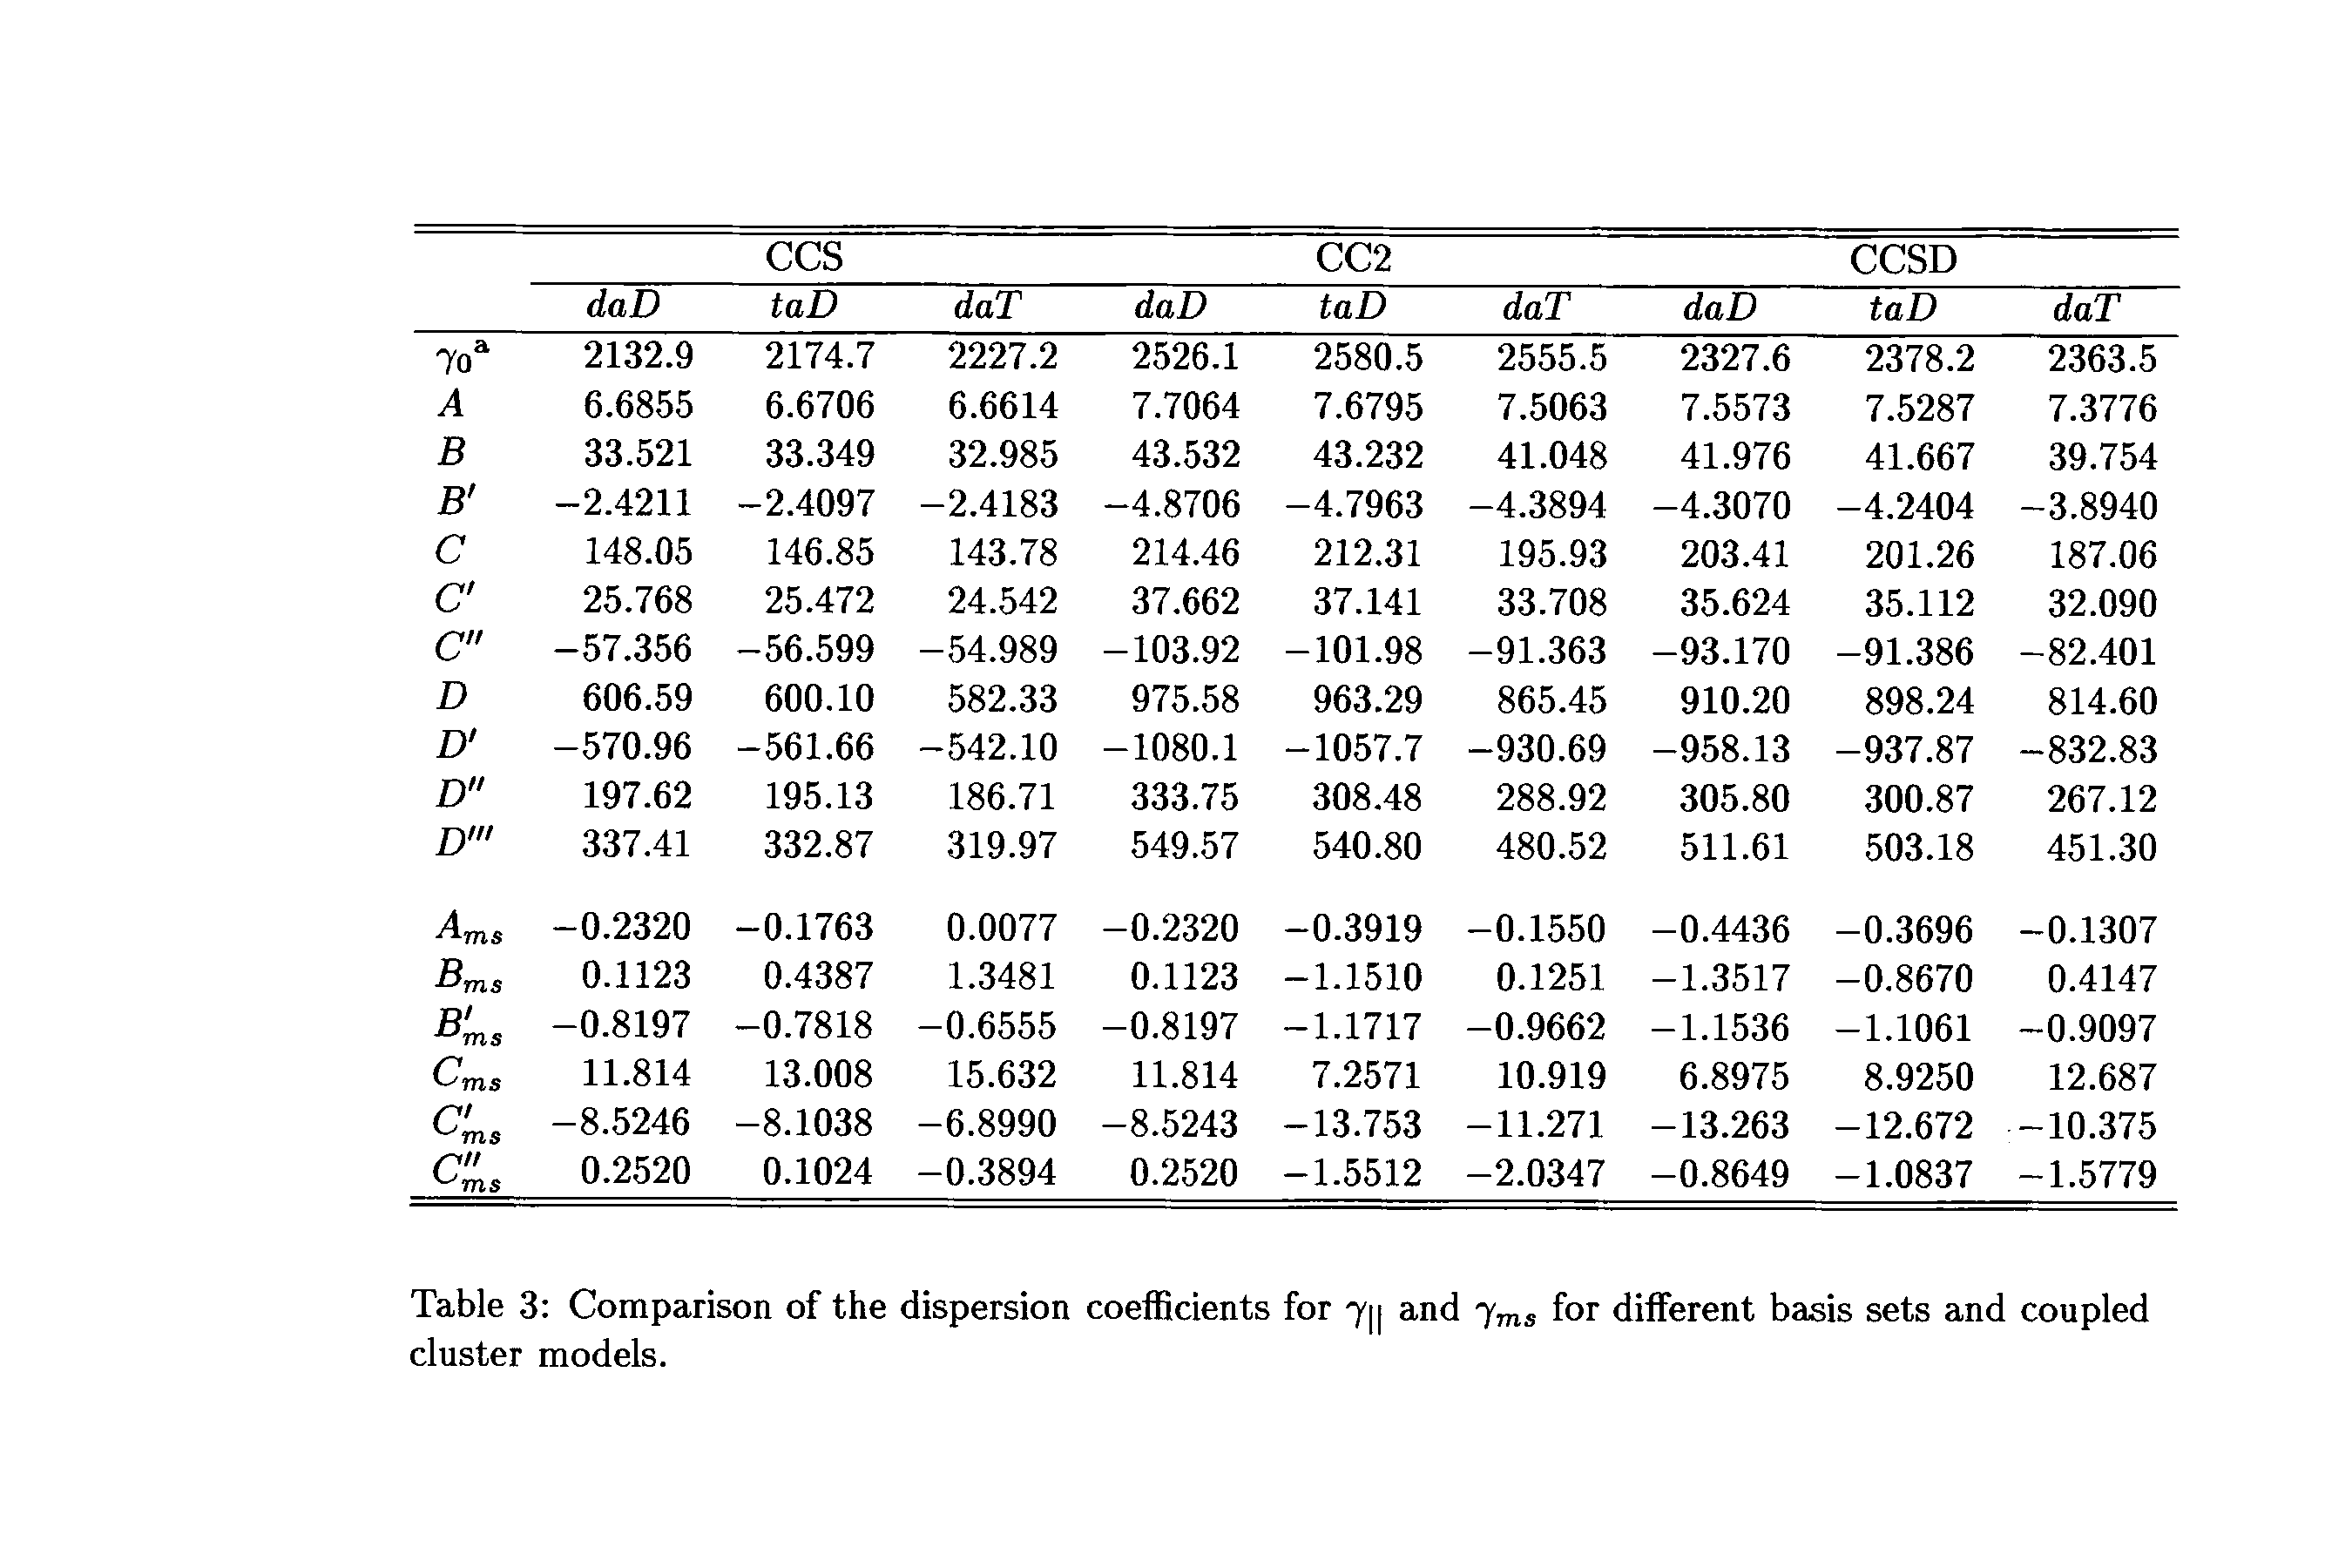 Table 3 Comparison of the dispersion coefficients for 7 and 7 for different basis sets and coupled cluster models.